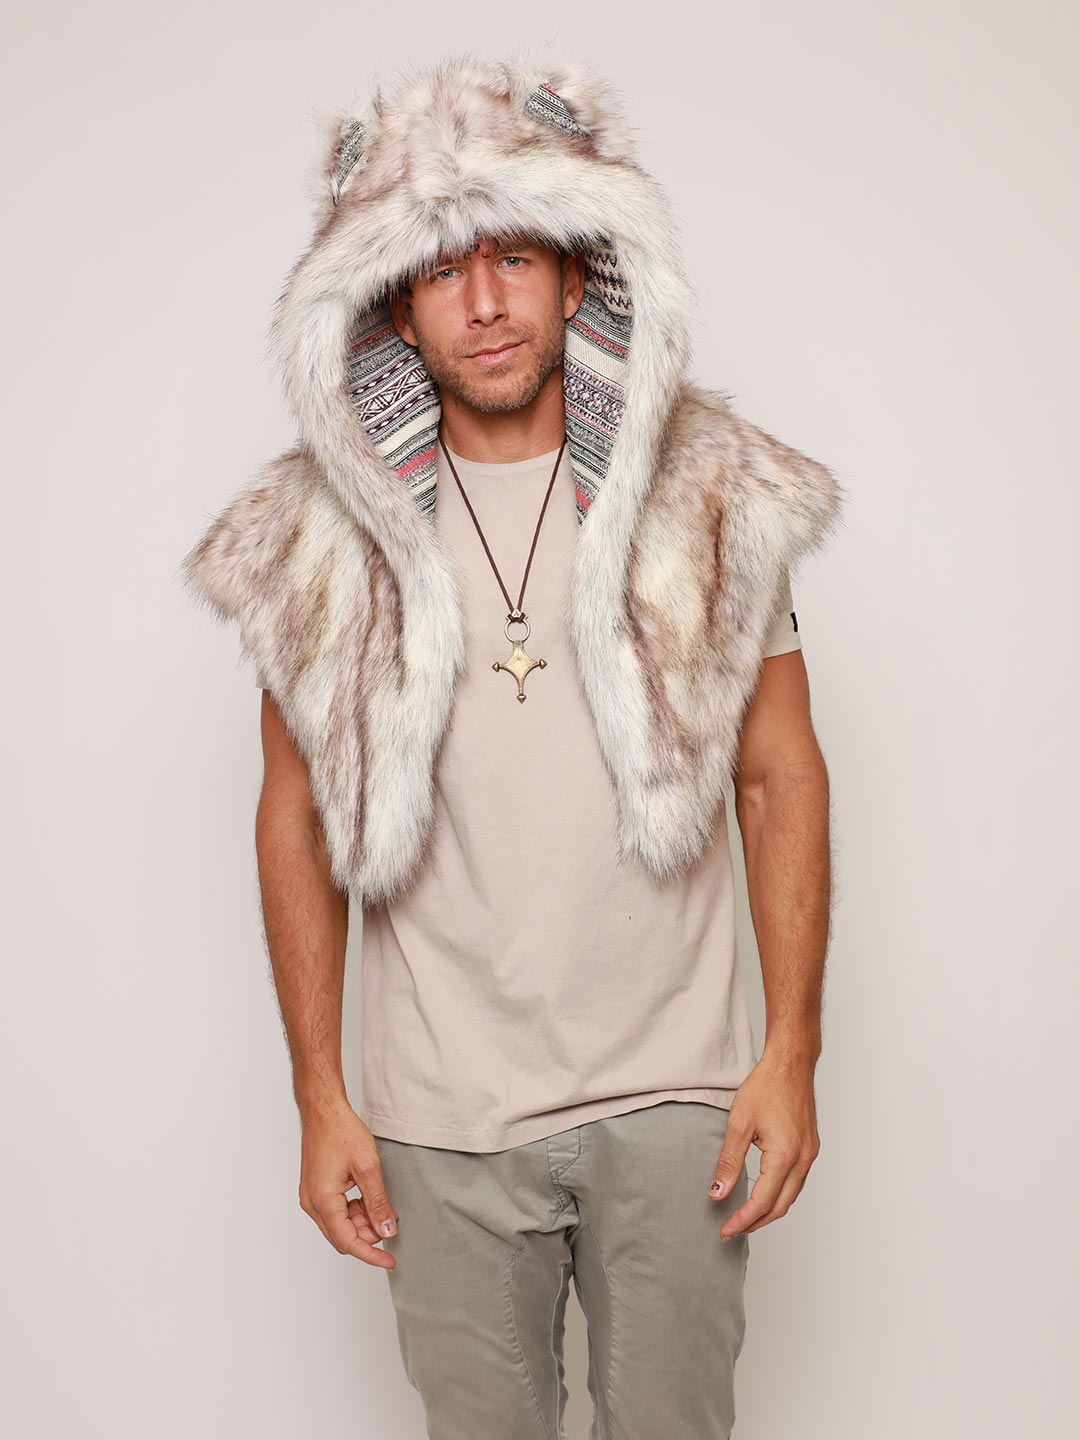 Timber Wolf Collector Faux Fur Shawl on Male Model Wearing Hood with Ears